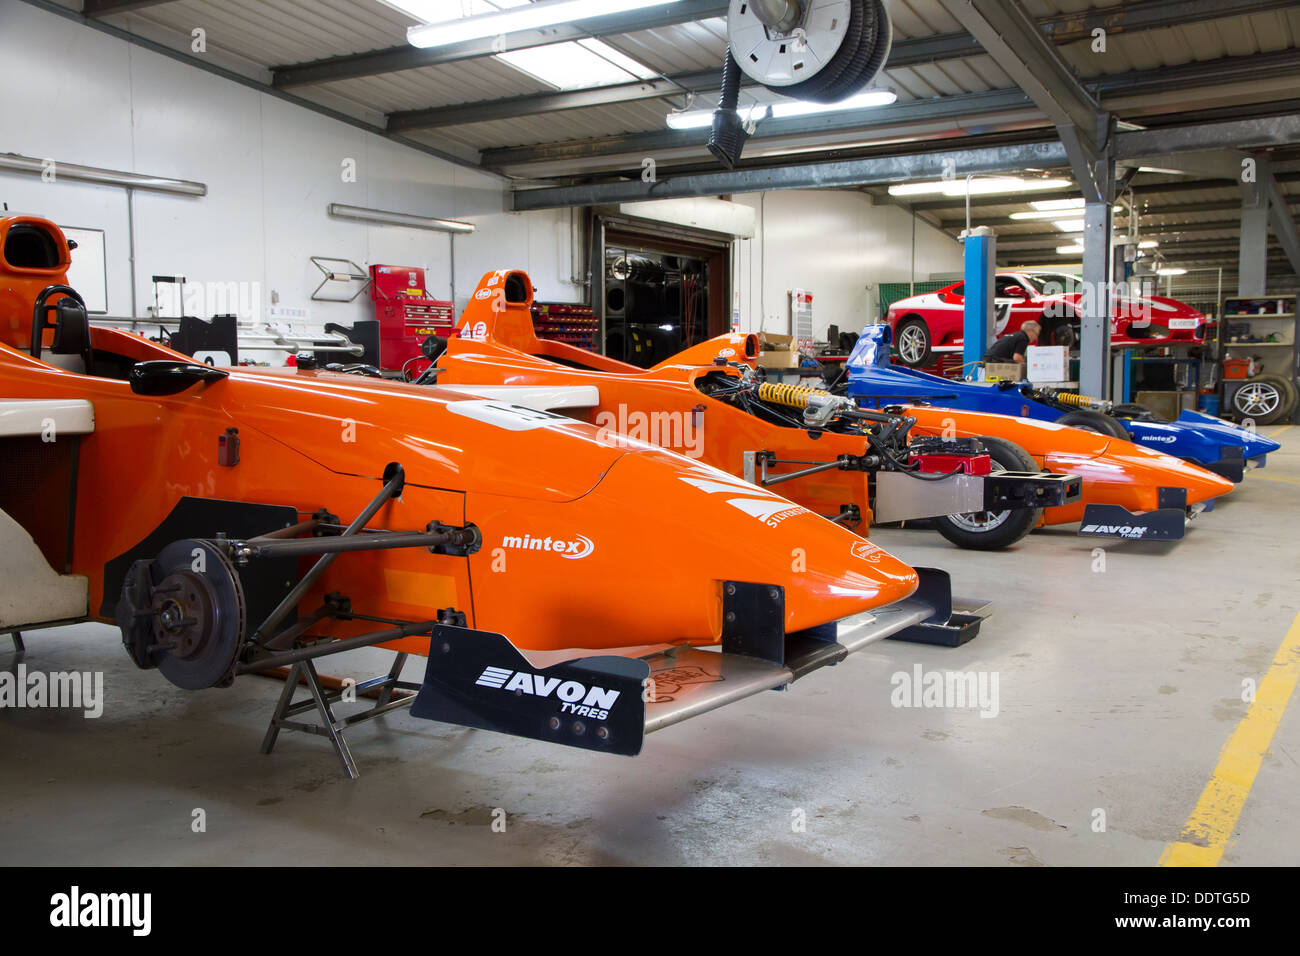 Formula Silverstone single seater racing cars in the garage, used for driving experiences at Silverstone Racing Circuit. Stock Photo